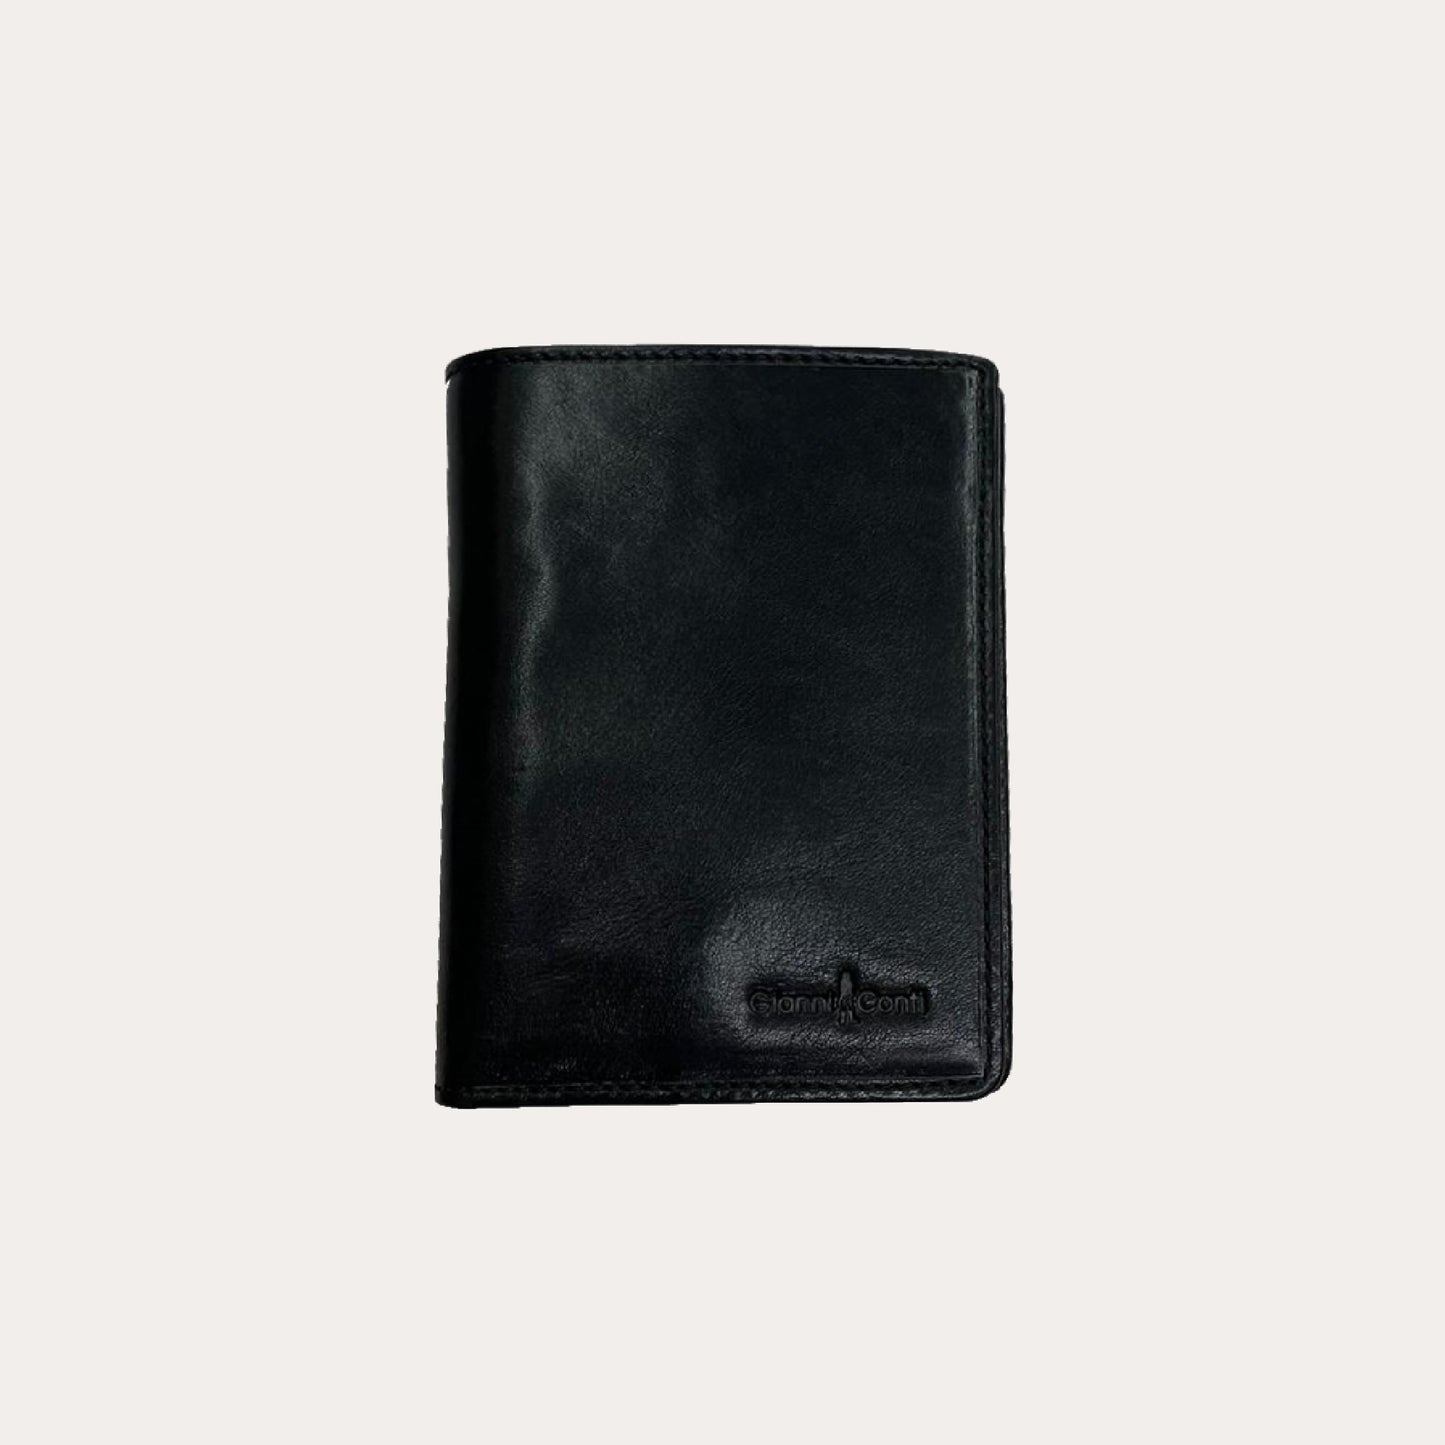 Gianni Conti Black Leather Wallet-6 Credit Card Sections